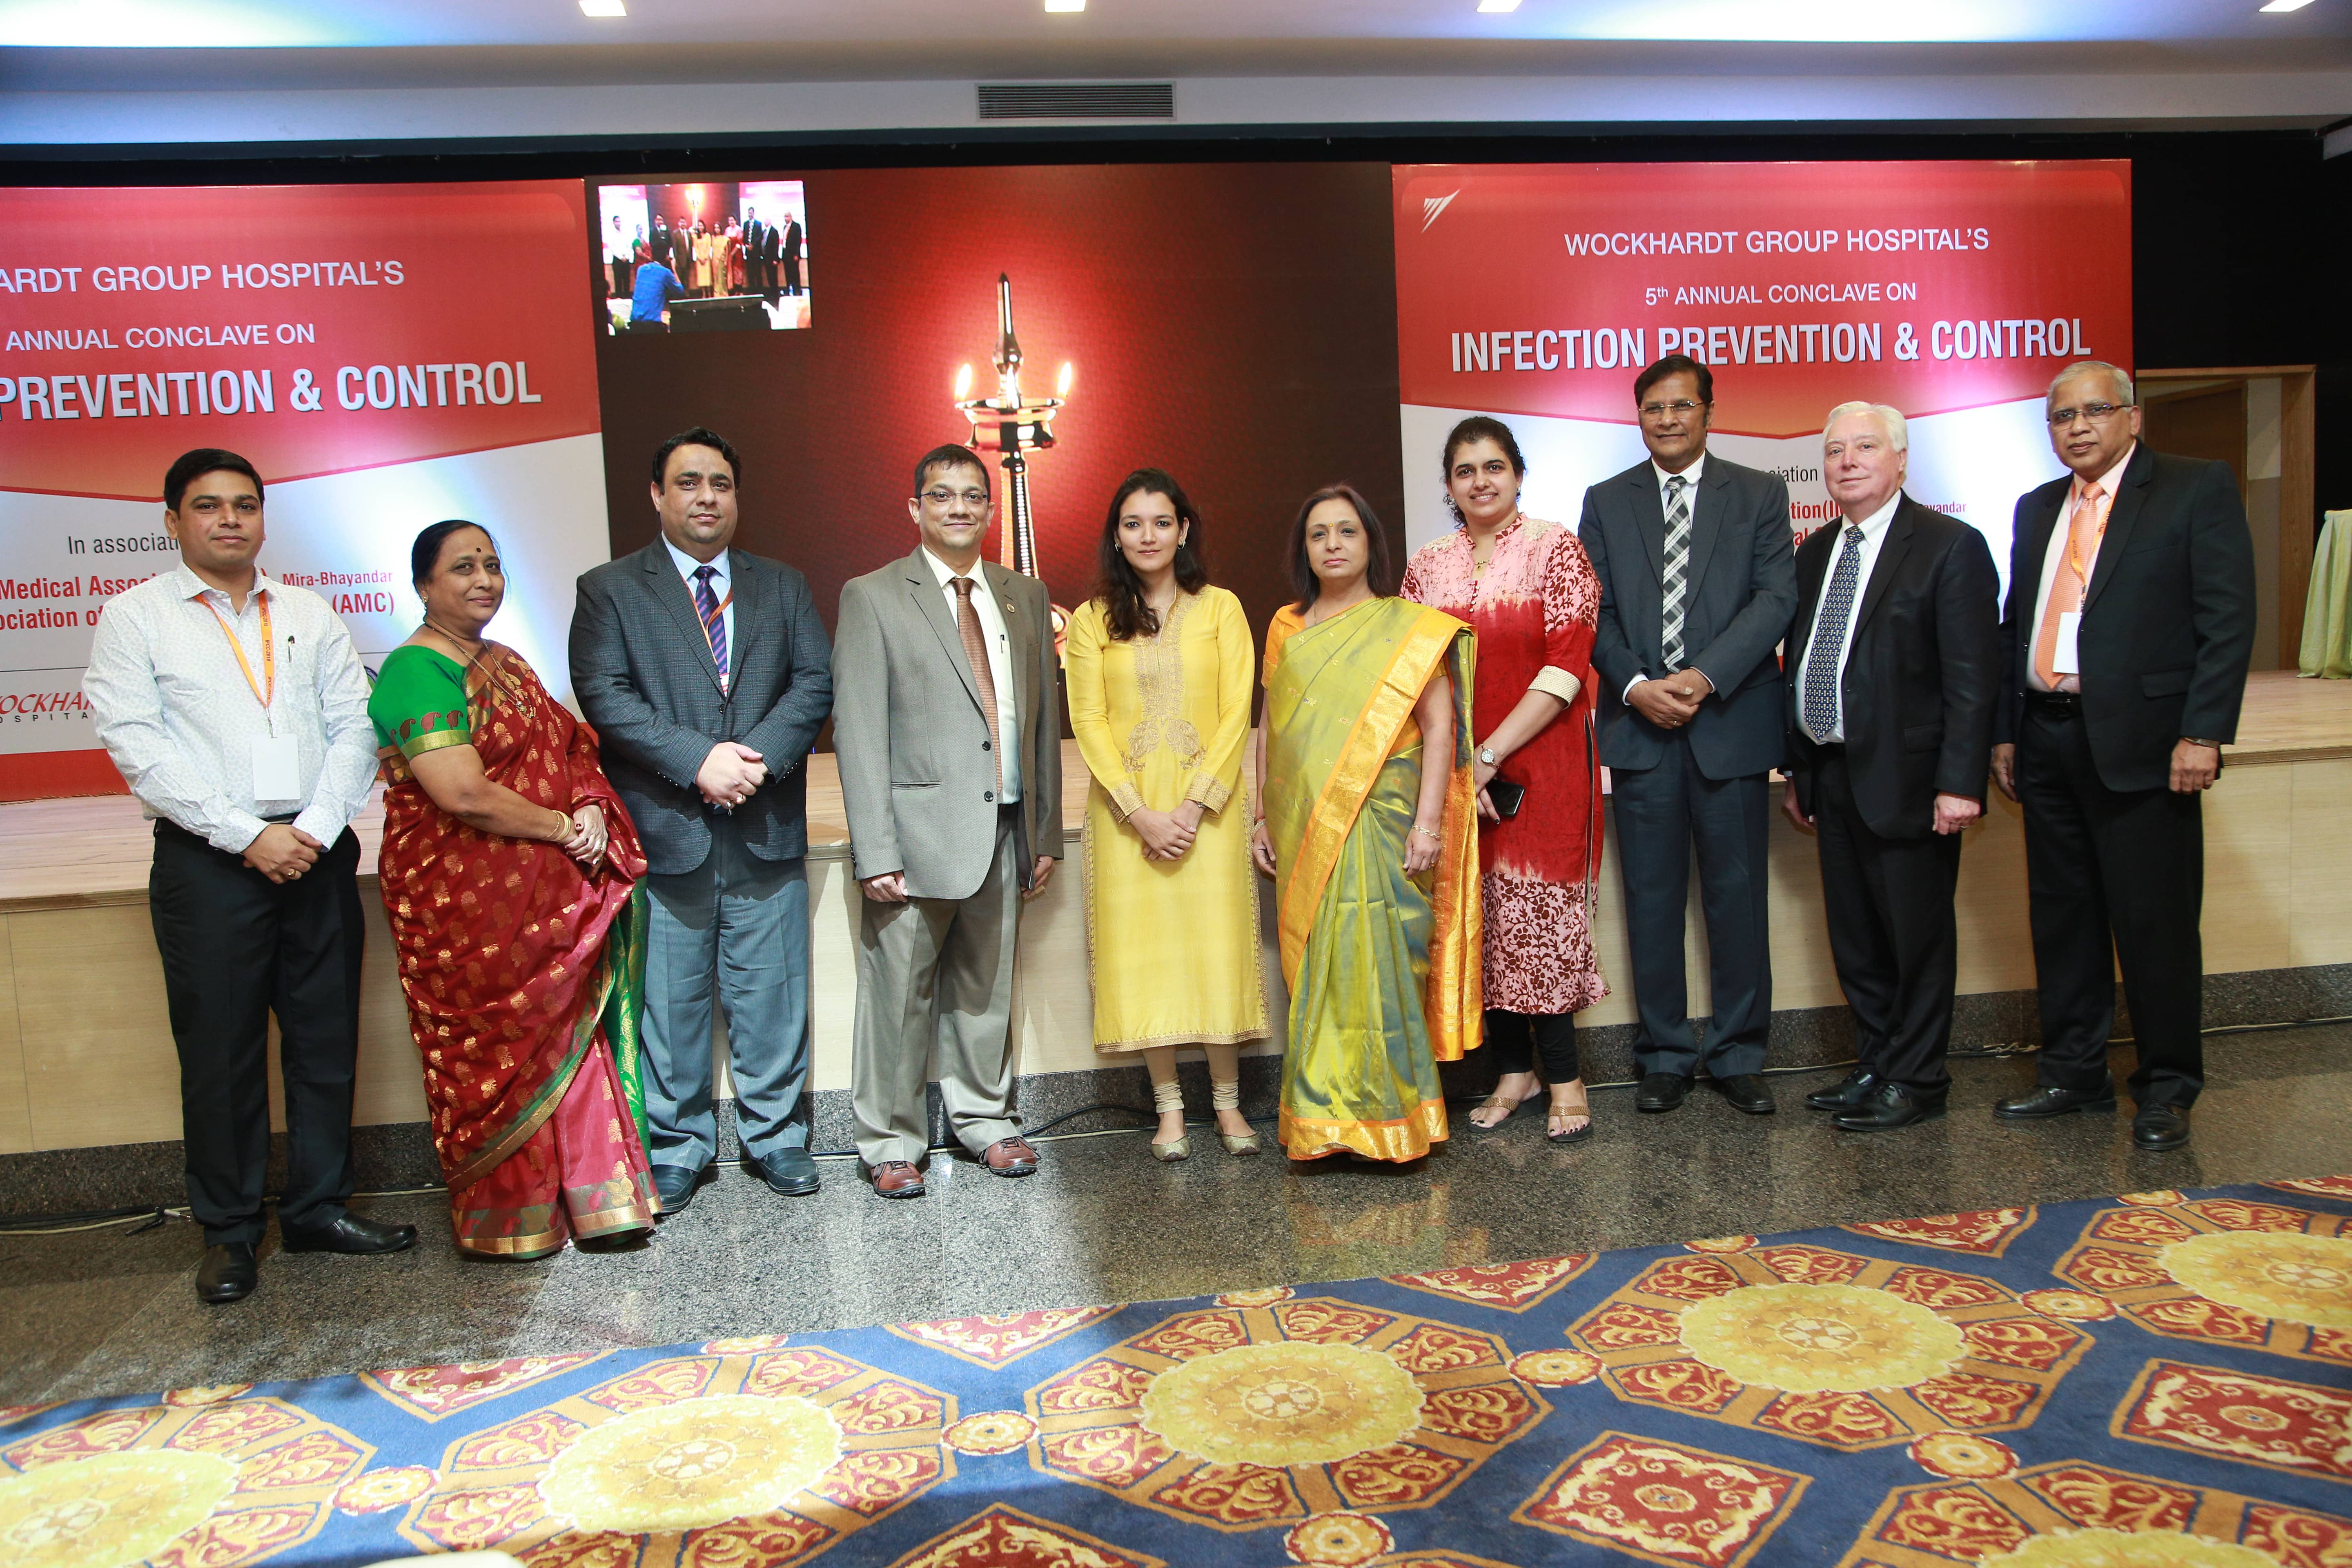 Wockhardt Hospitals’ MD, Ms. Zahabiya Khorakiwala; Group Clinical Director, Dr. Clive Fernandes, President, Mr. Anupam Verma & CEO, Dr. Ravi Hirwani during inauguration of hospital’s 5th Infection Prevention and Control Conclave in presence of Dr. Girdhar Gyani, Director General, AHPI and Thomas W. Kozlowski, JCI